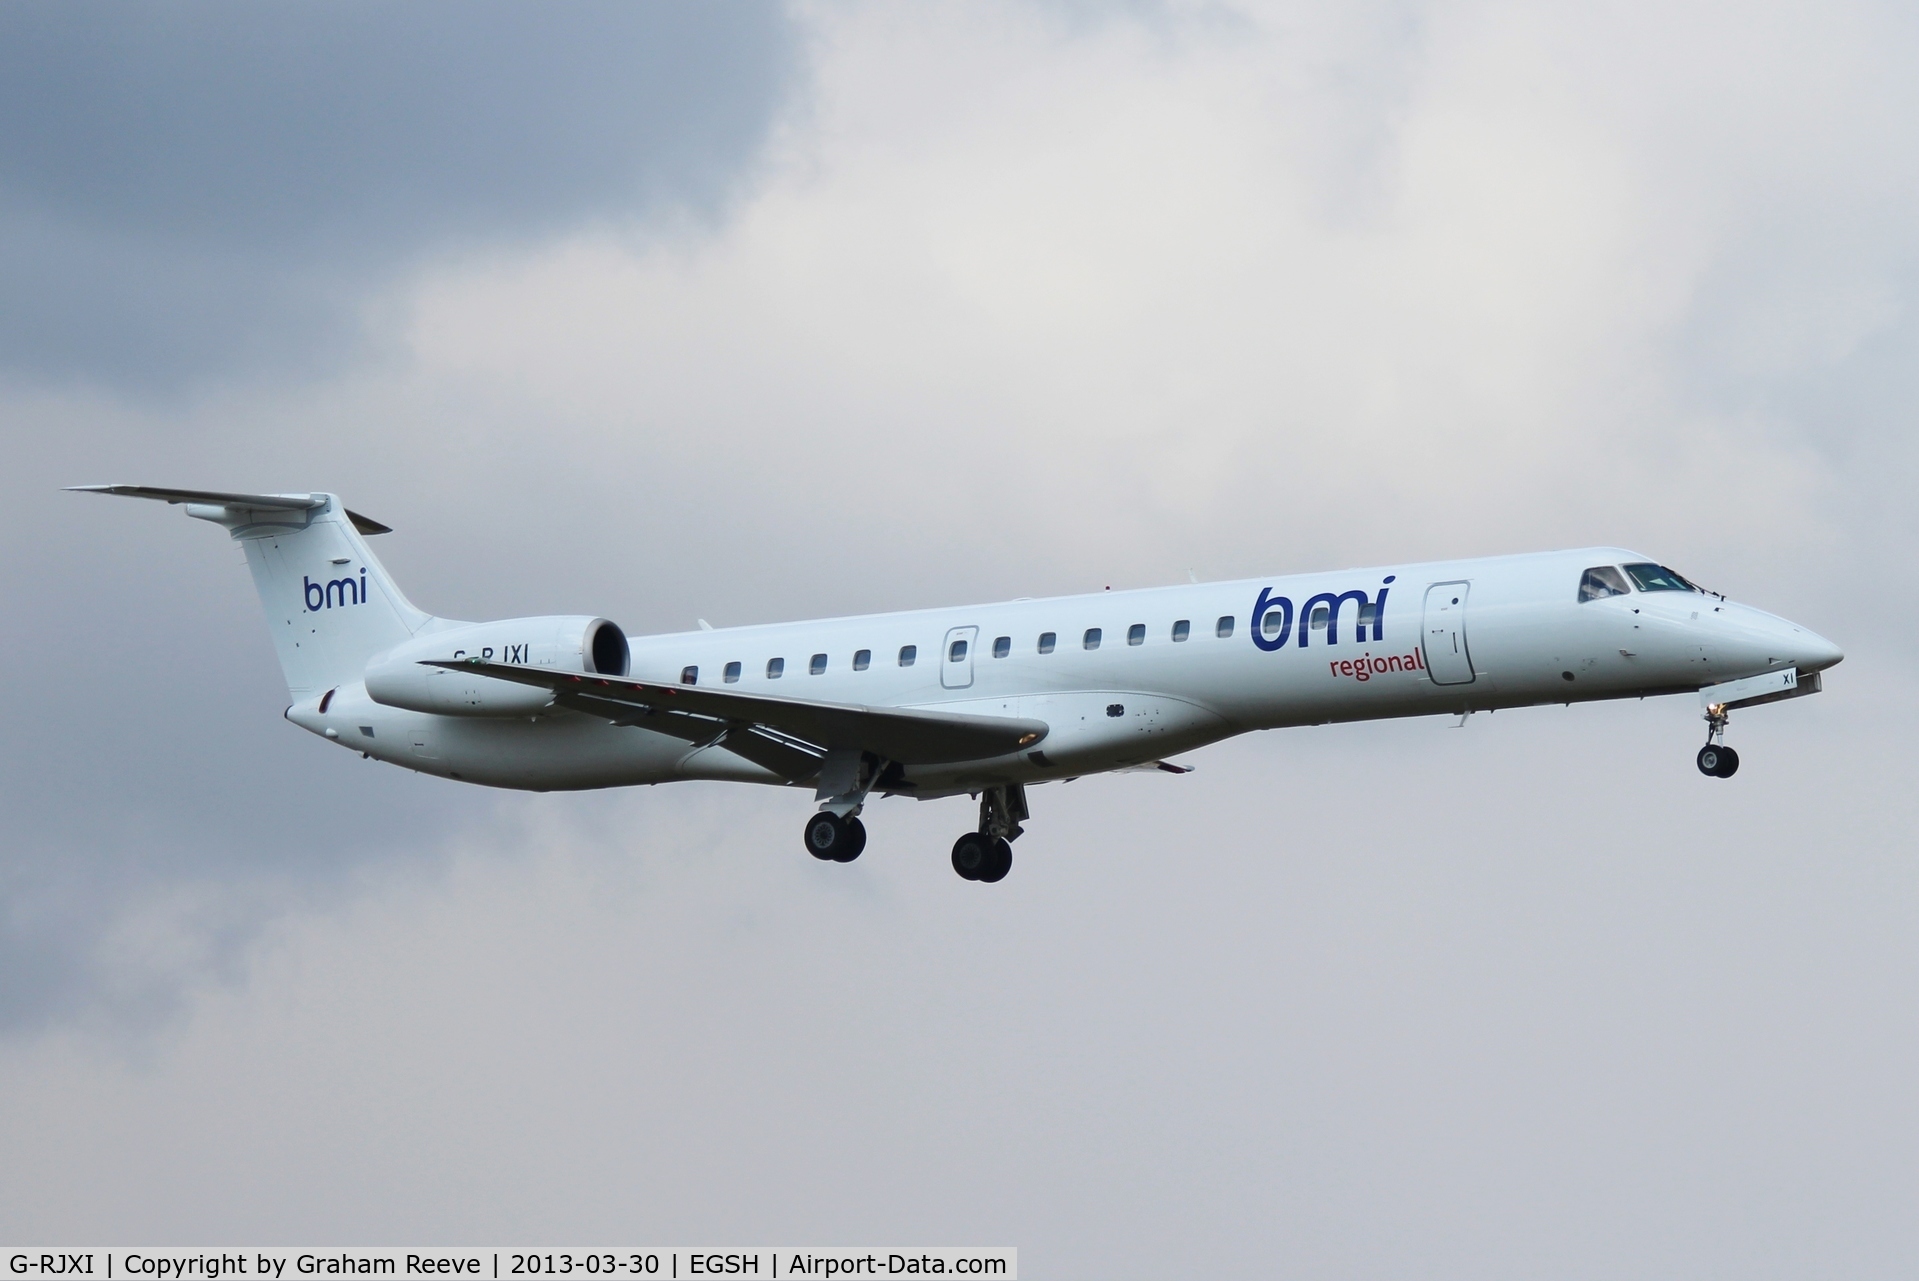 G-RJXI, 2001 Embraer EMB-145EP (ERJ-145EP) C/N 145454, about to touch down on 09.